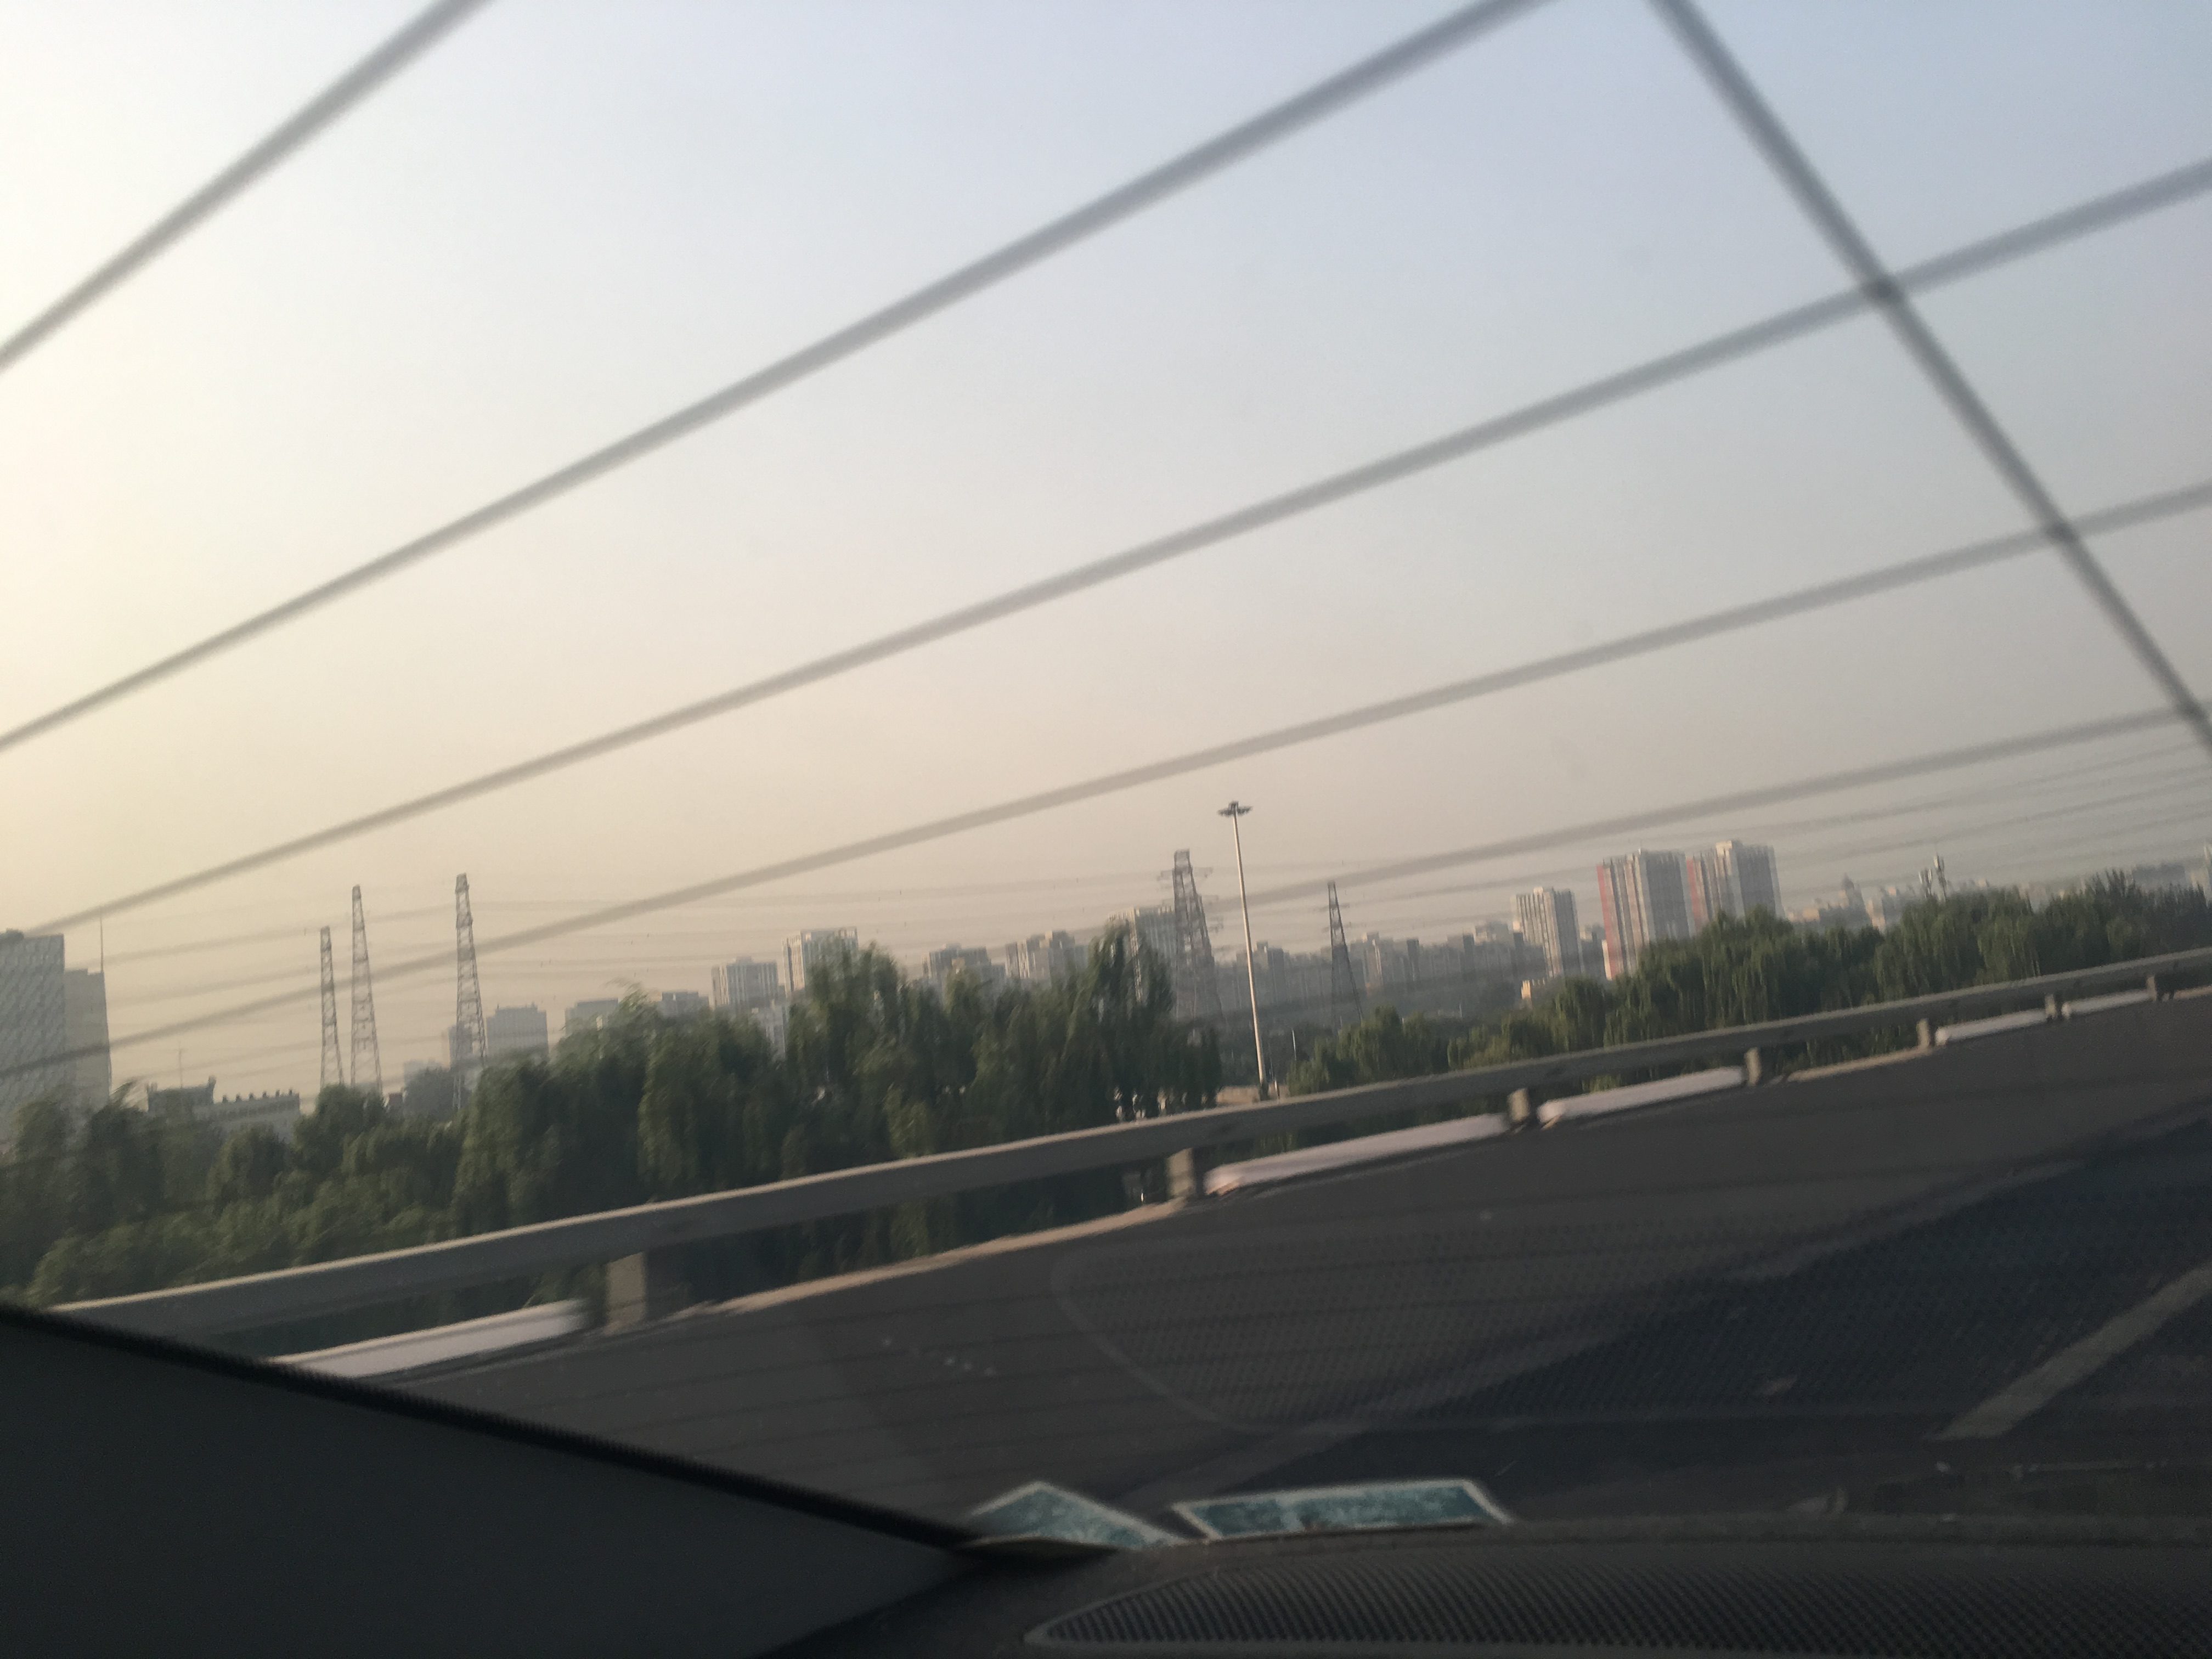 Driving out of Beijing, looking back at the fringe of the city